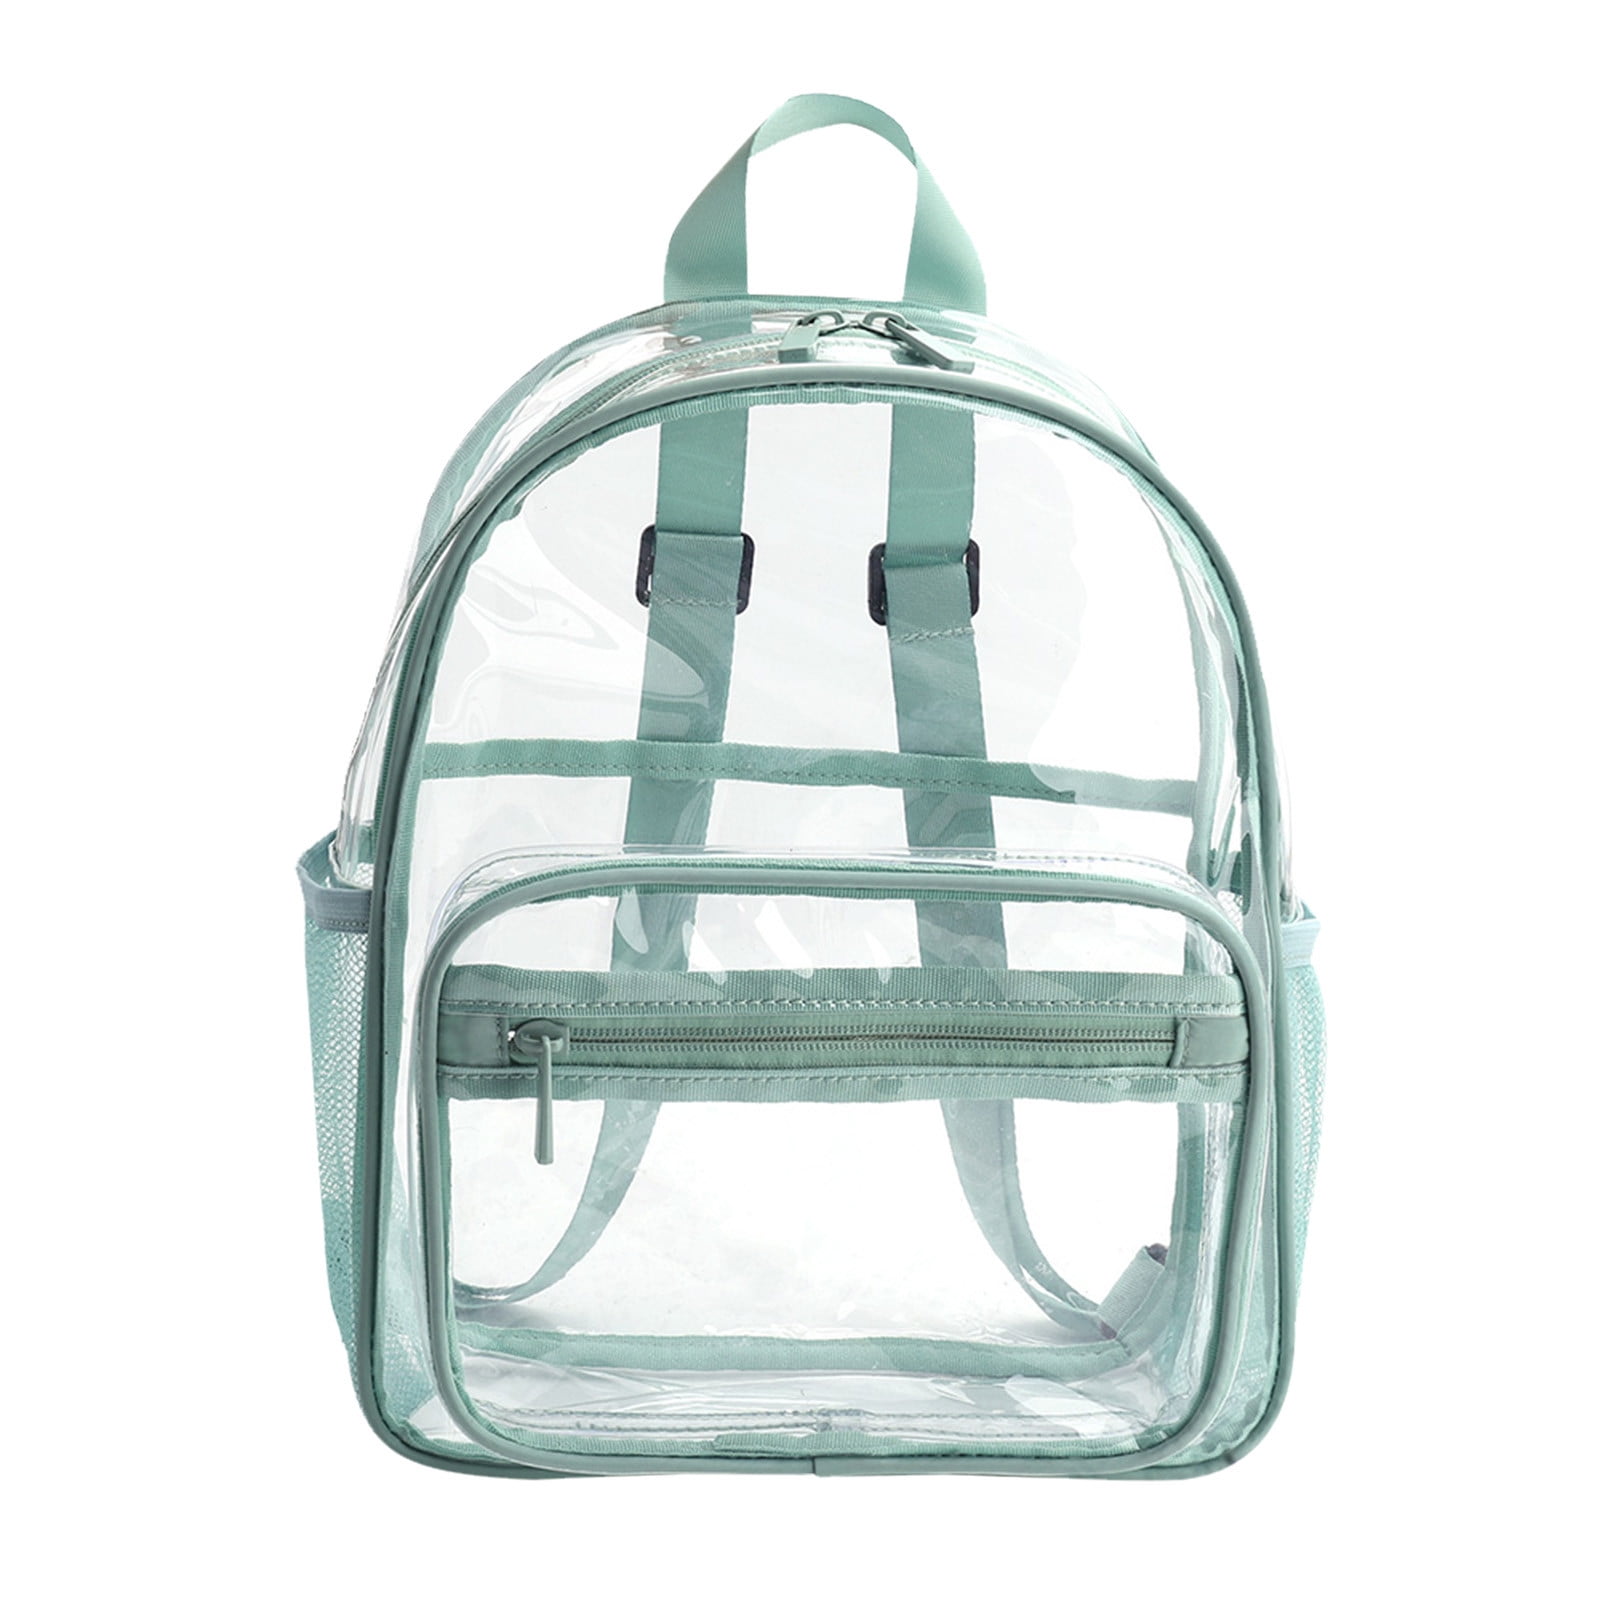 Details more than 90 clear book bags at walmart best - in.duhocakina